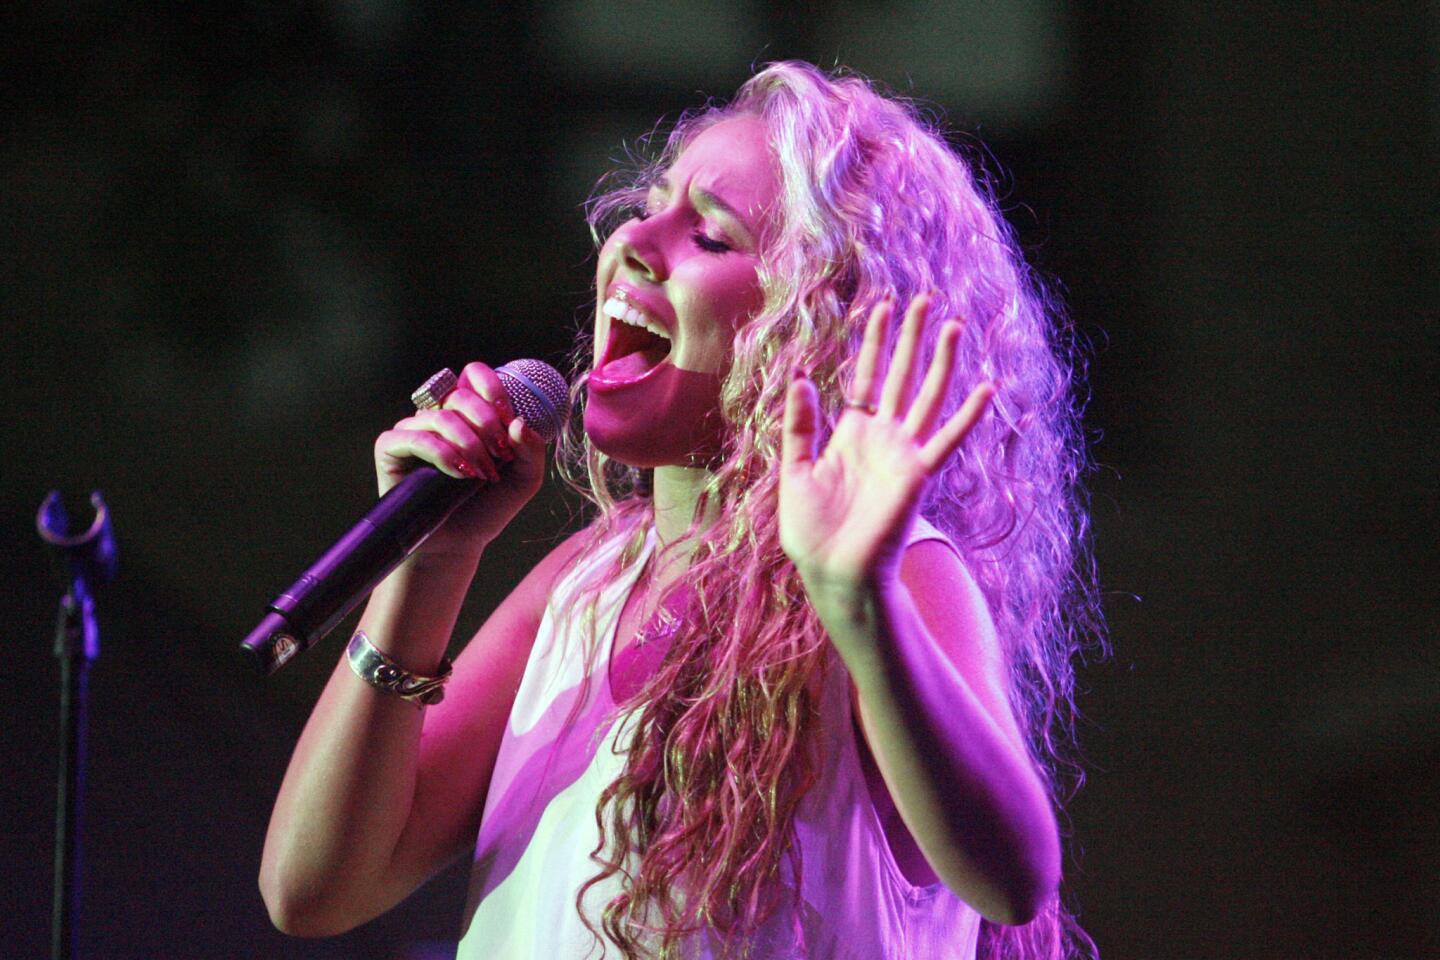 American Idol Haley Reinhart performs at the Americana in Glendale on Thursday, August 23, 2012.